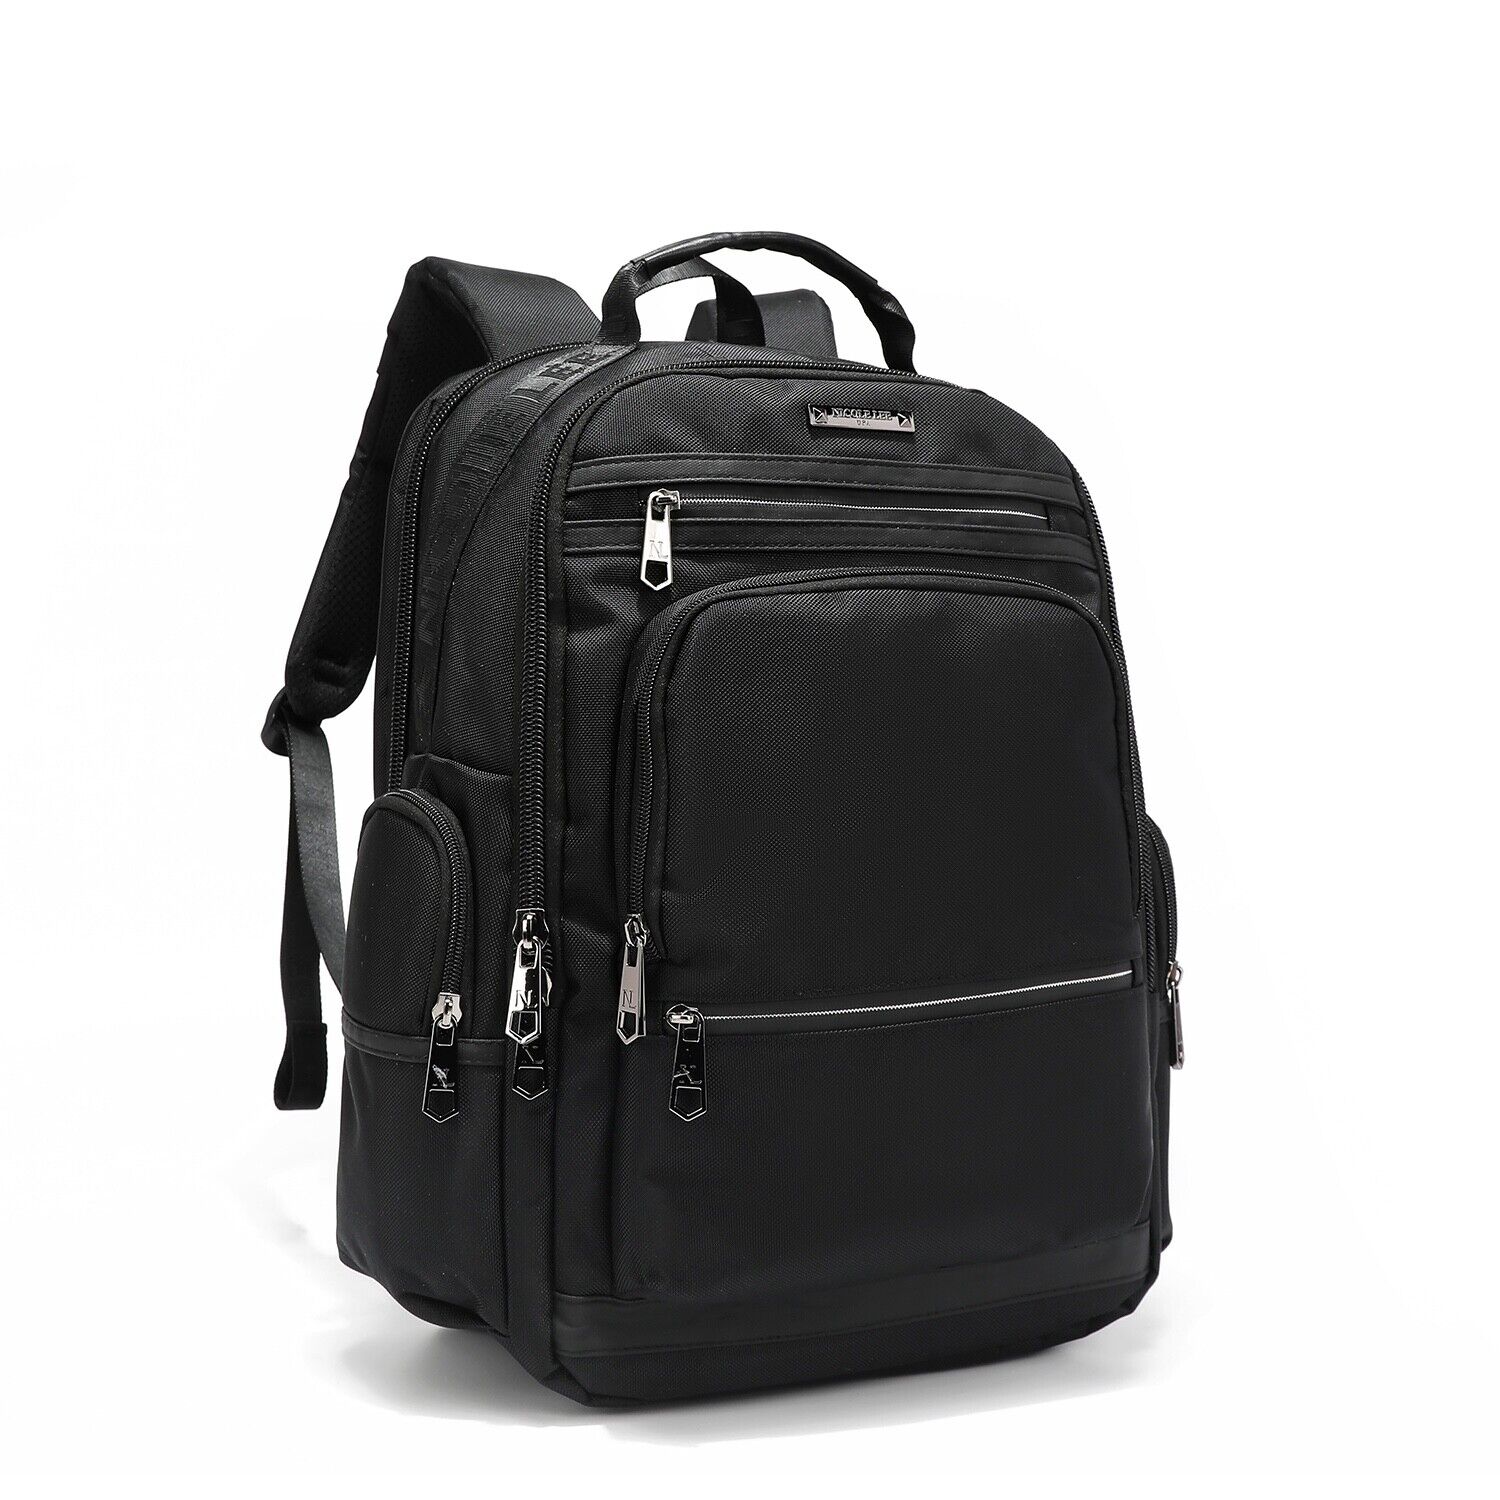 Men's Career Multi Travel USB Backpack with Multiple Compartments